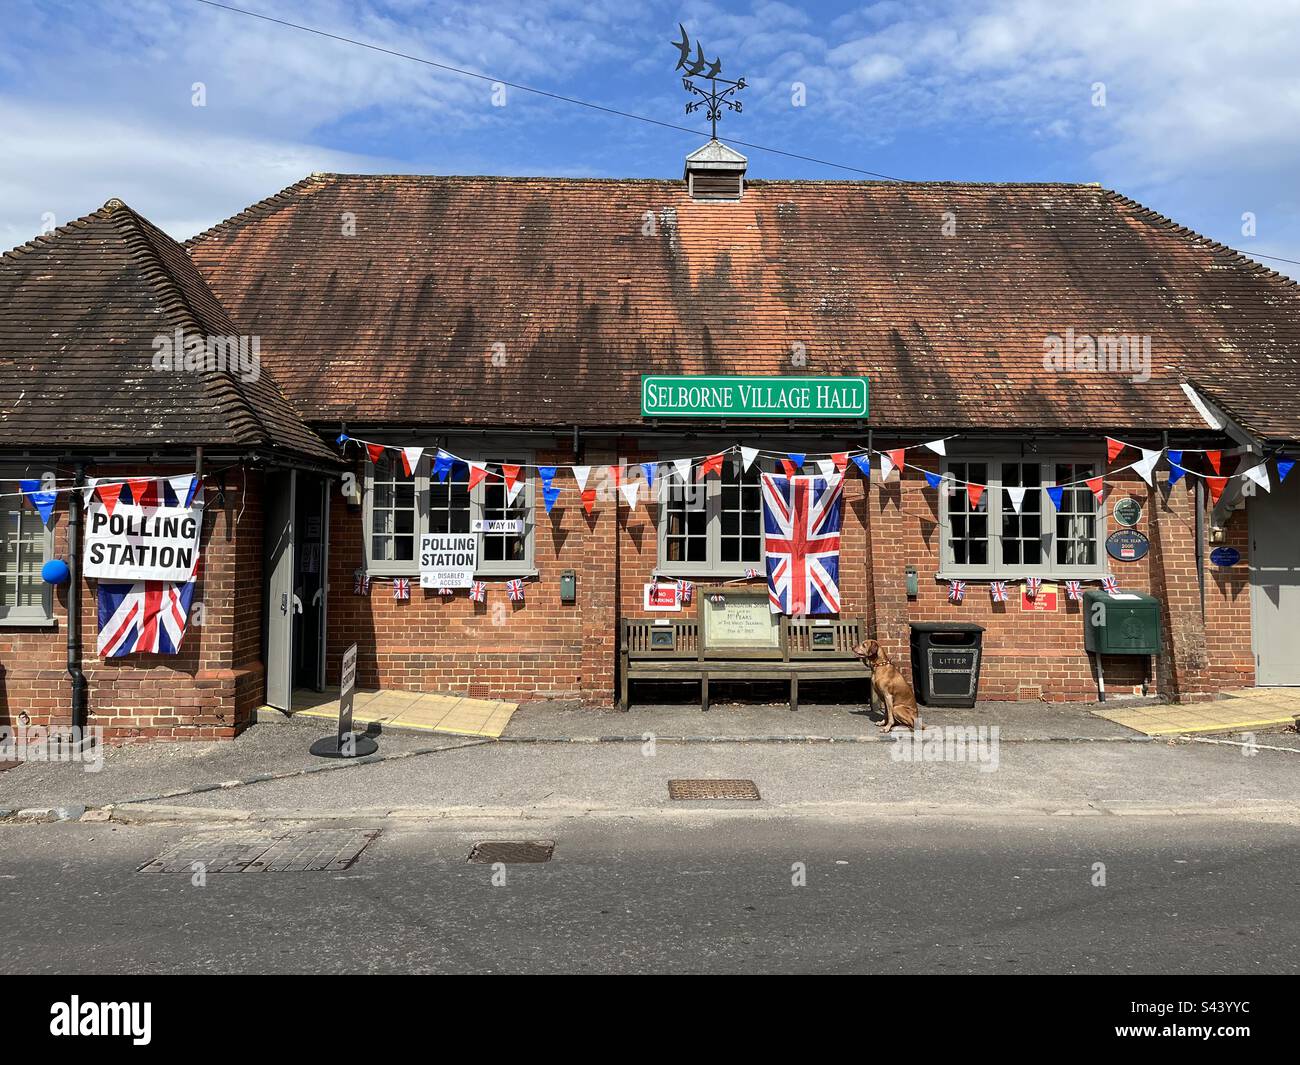 Union flags, bunting and a polling station sign are seen hanging at Sherborne Village Hall in Hampshire on local election day ahead of the Coronation of King Charles III. Stock Photo